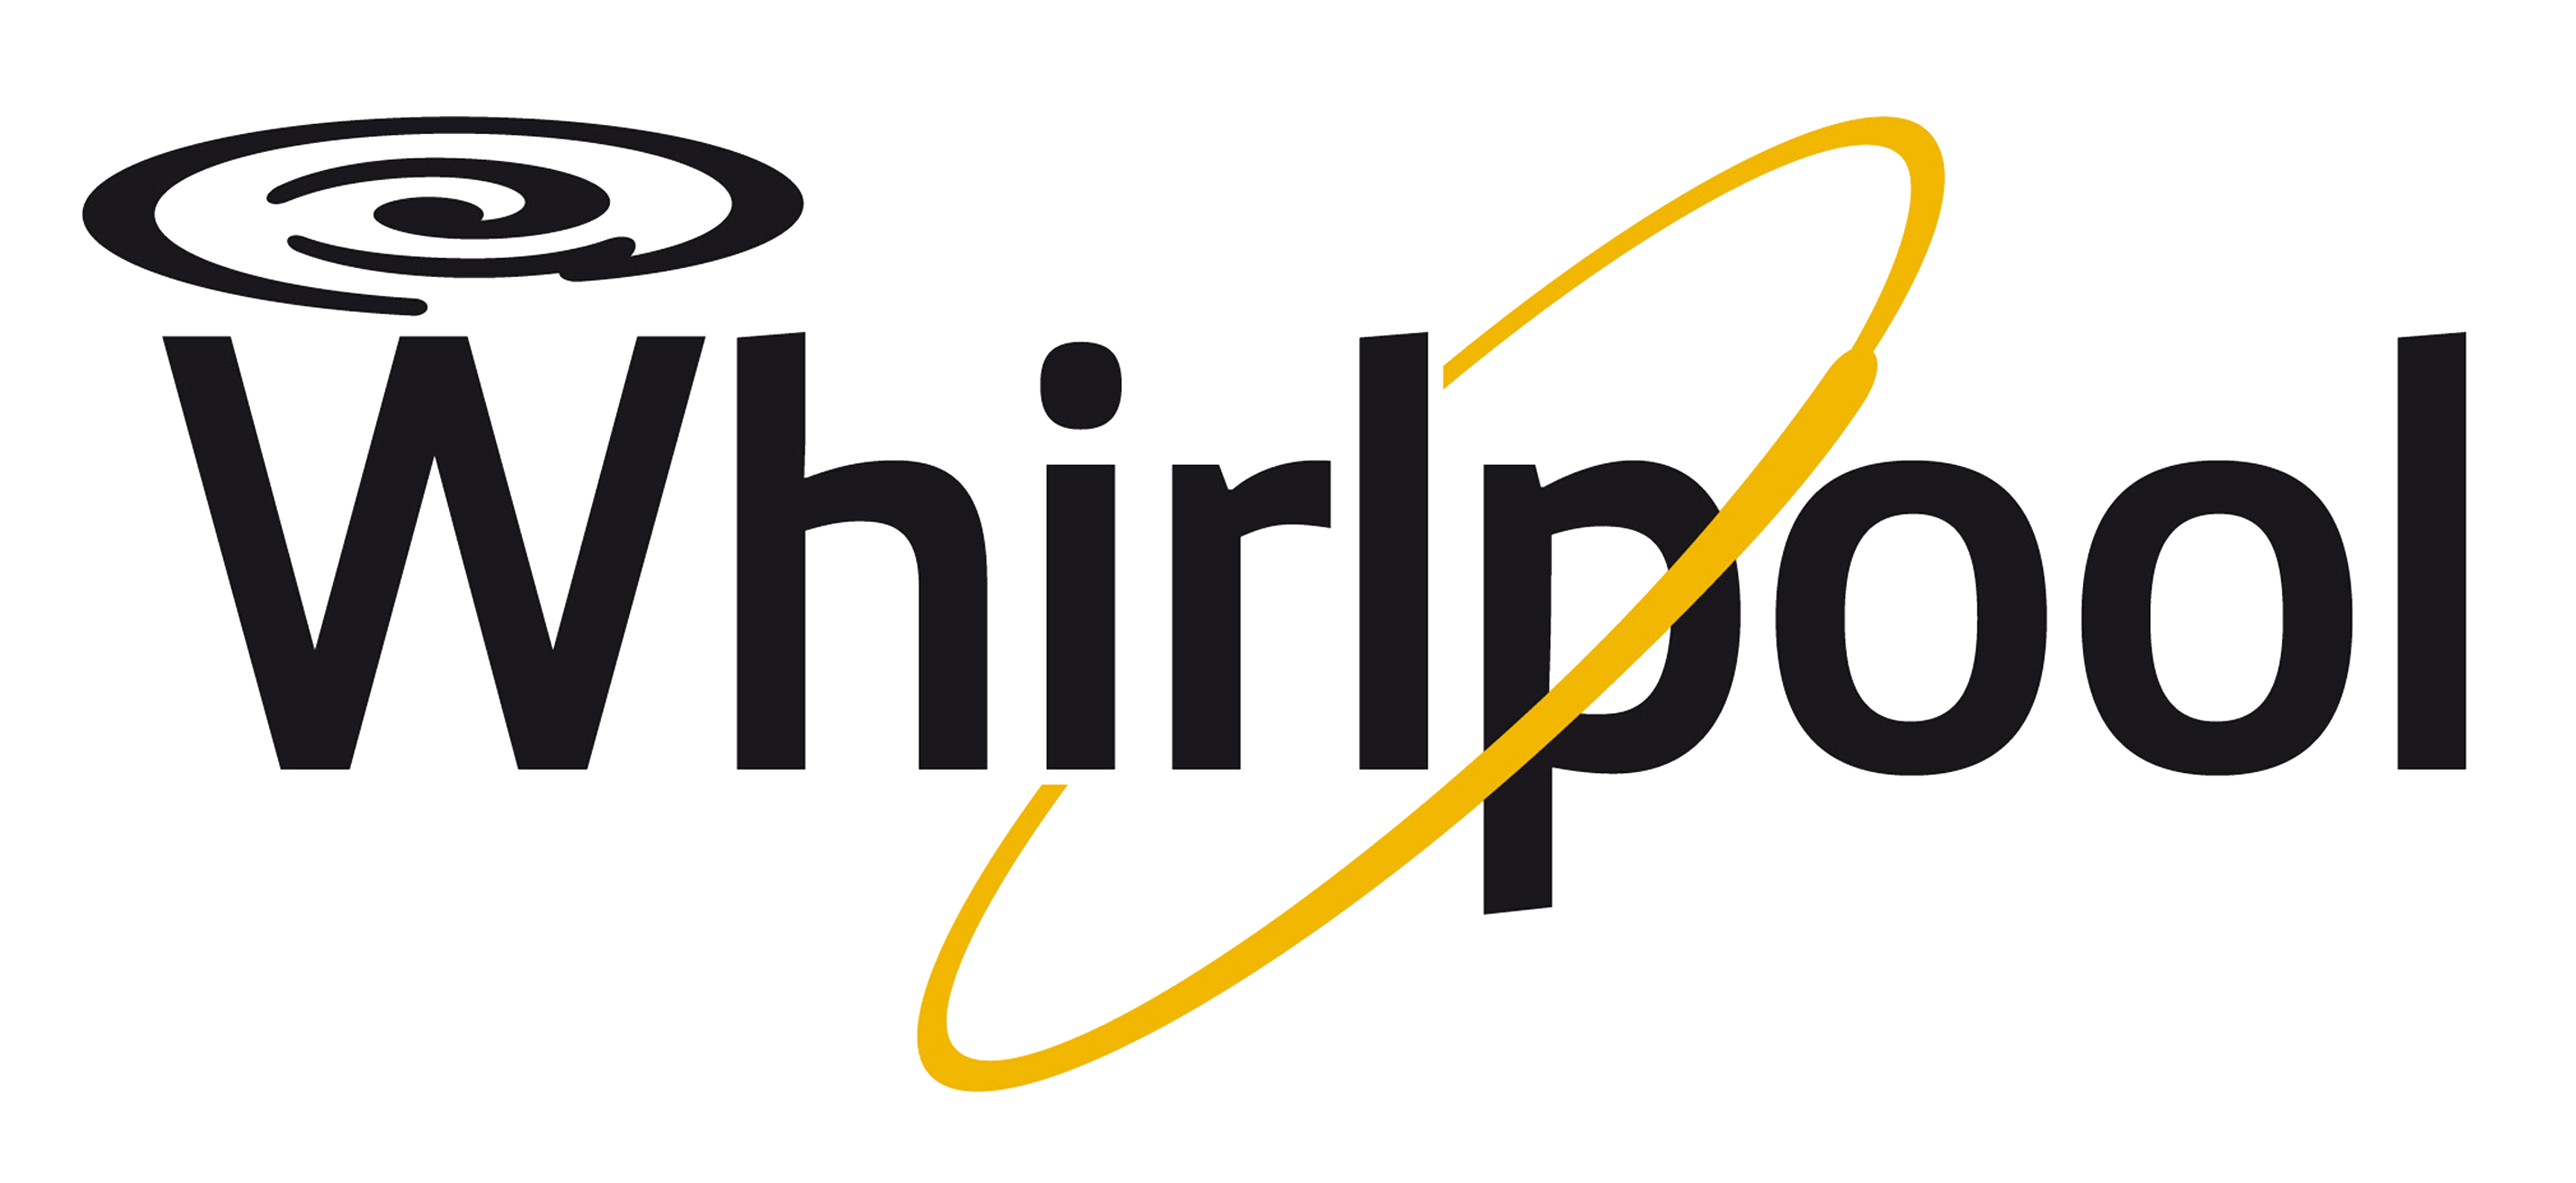 Whirlpool Washer Dryer Technician, West Hollywood, Whirlpool Washer Repair